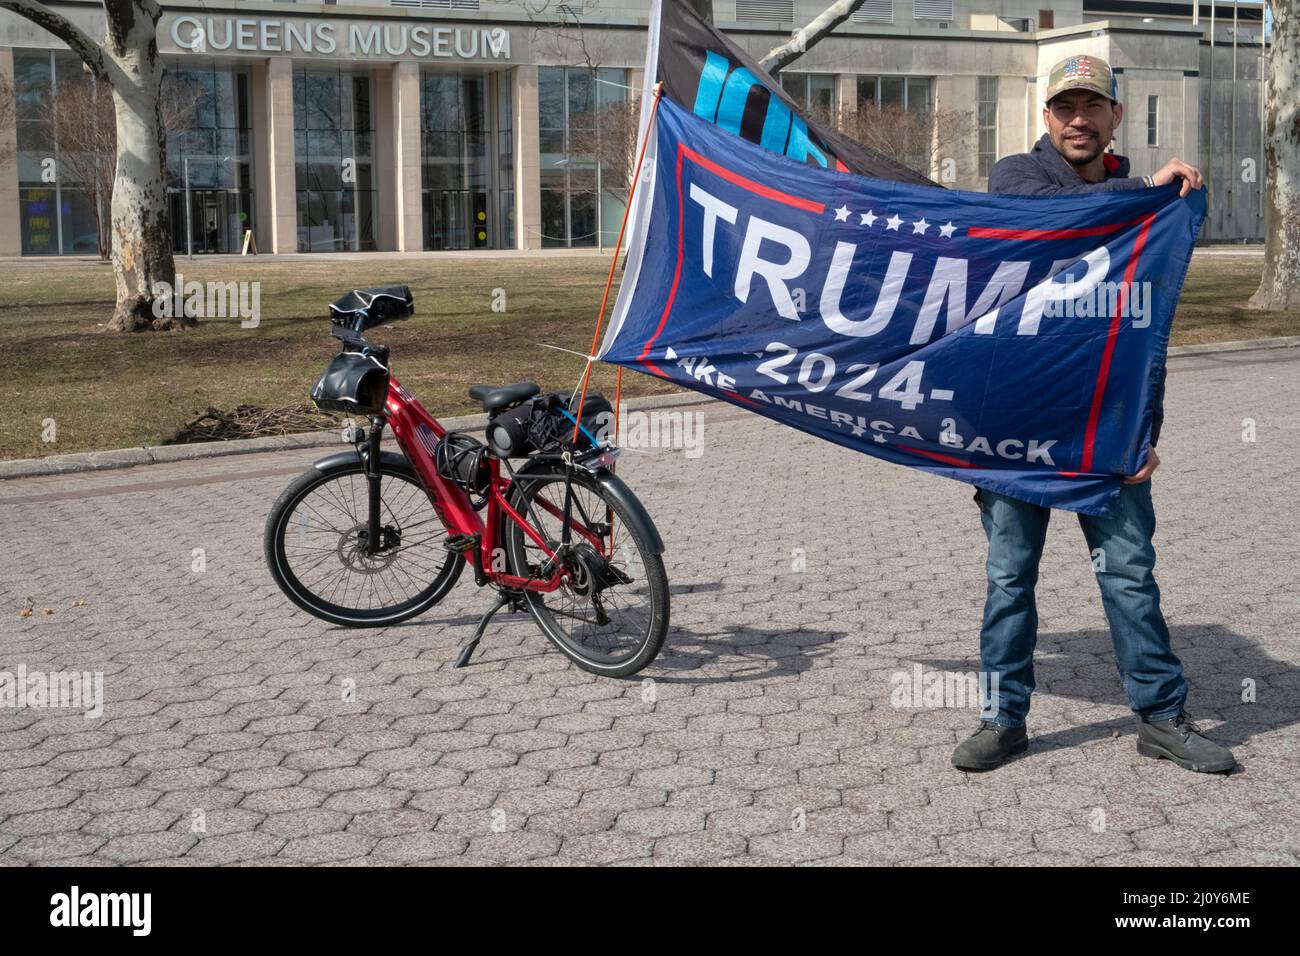 Dominican American right wing Trump supporter who rides around on his bike with pro Trump and anti Biden banners. In a park in Queens, New York City. Stock Photo